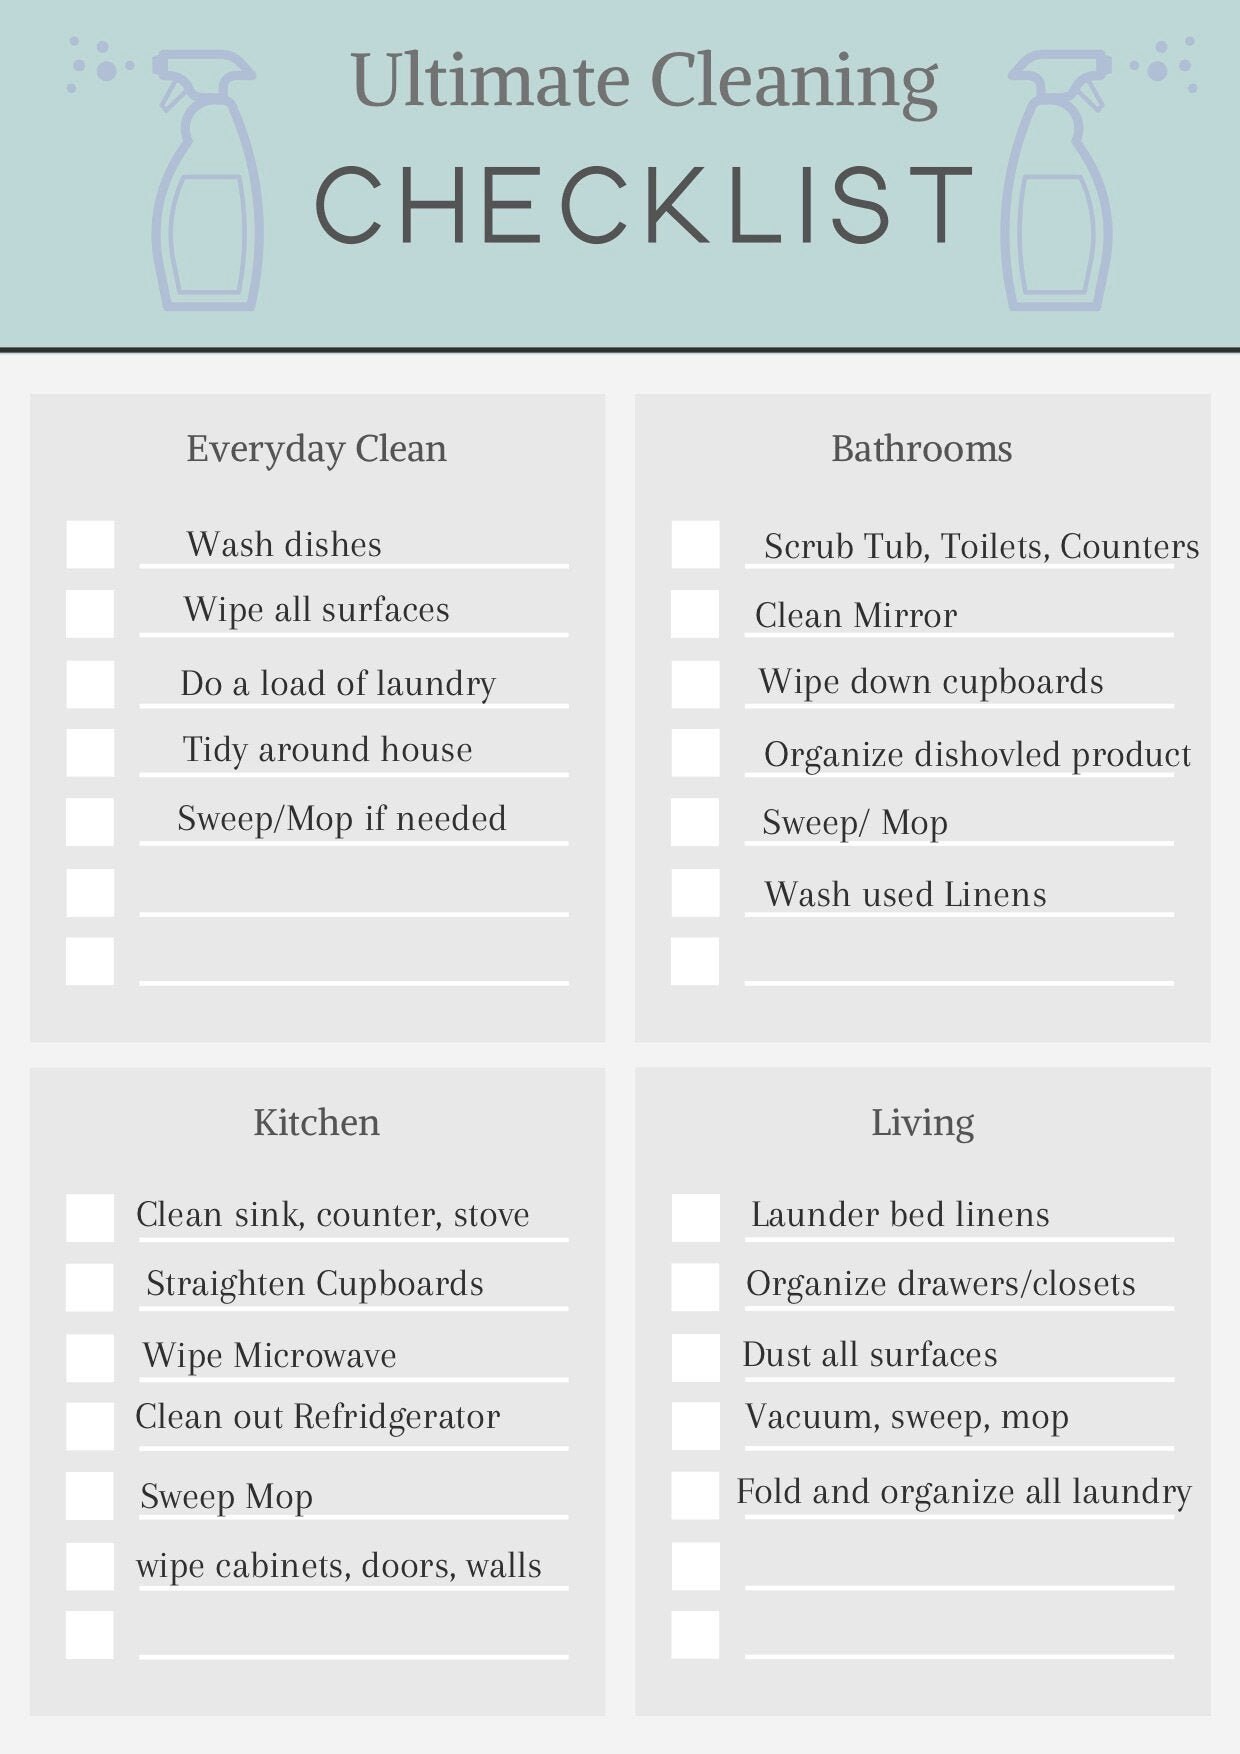 ultimate-cleaning-checklist-printable-cleaning-schedule-home-etsy